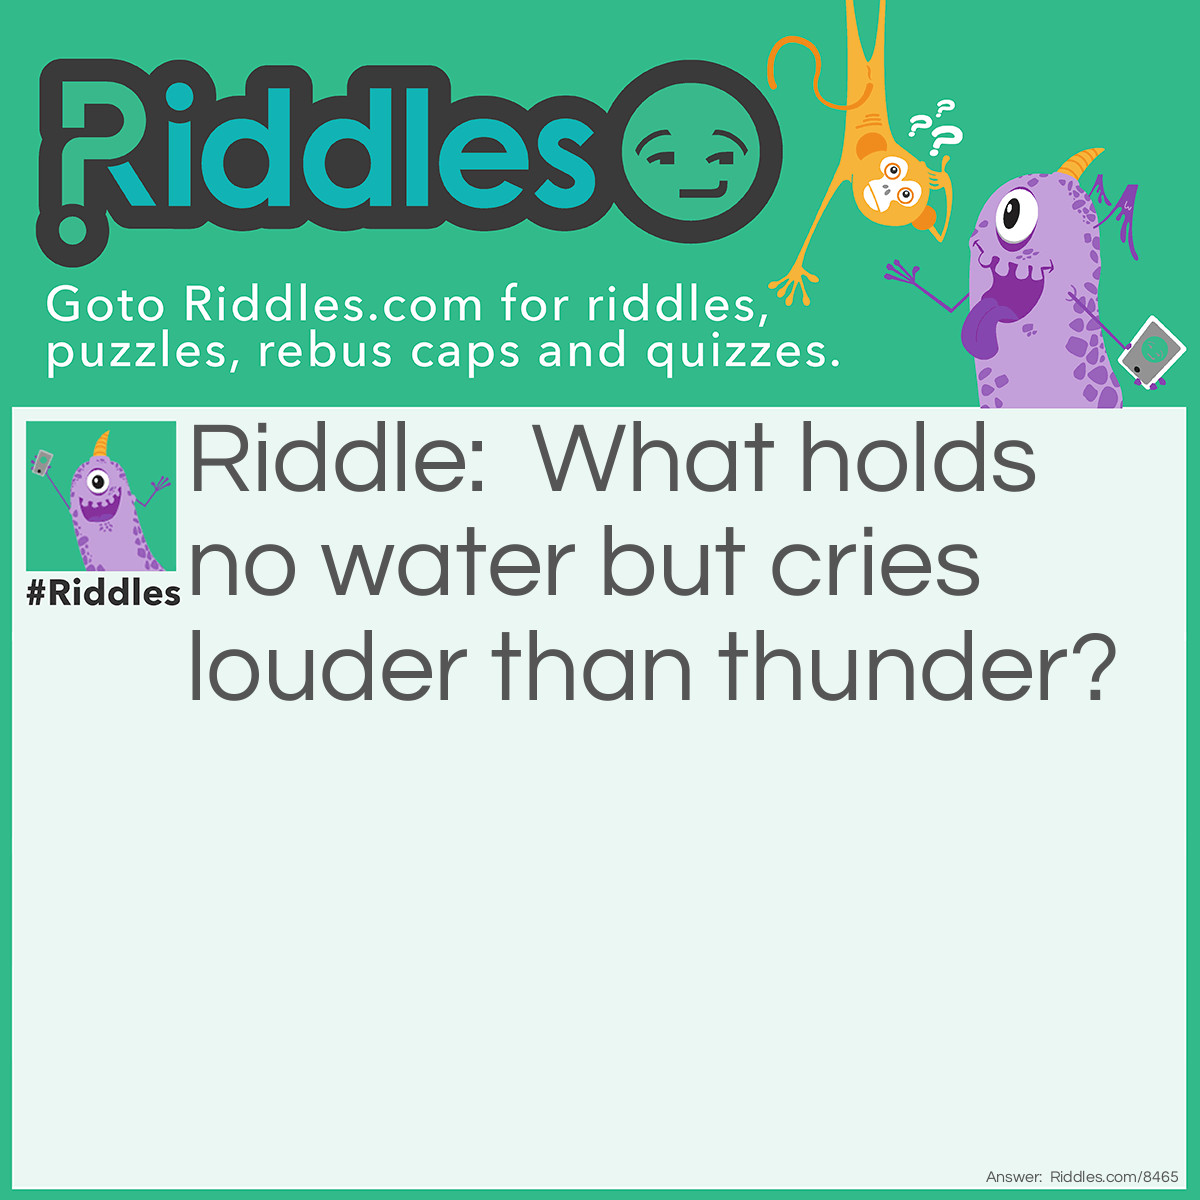 Riddle: What holds no water but cries louder than thunder? Answer: A 'fickle gland'. Fire off in the comments if you get it.